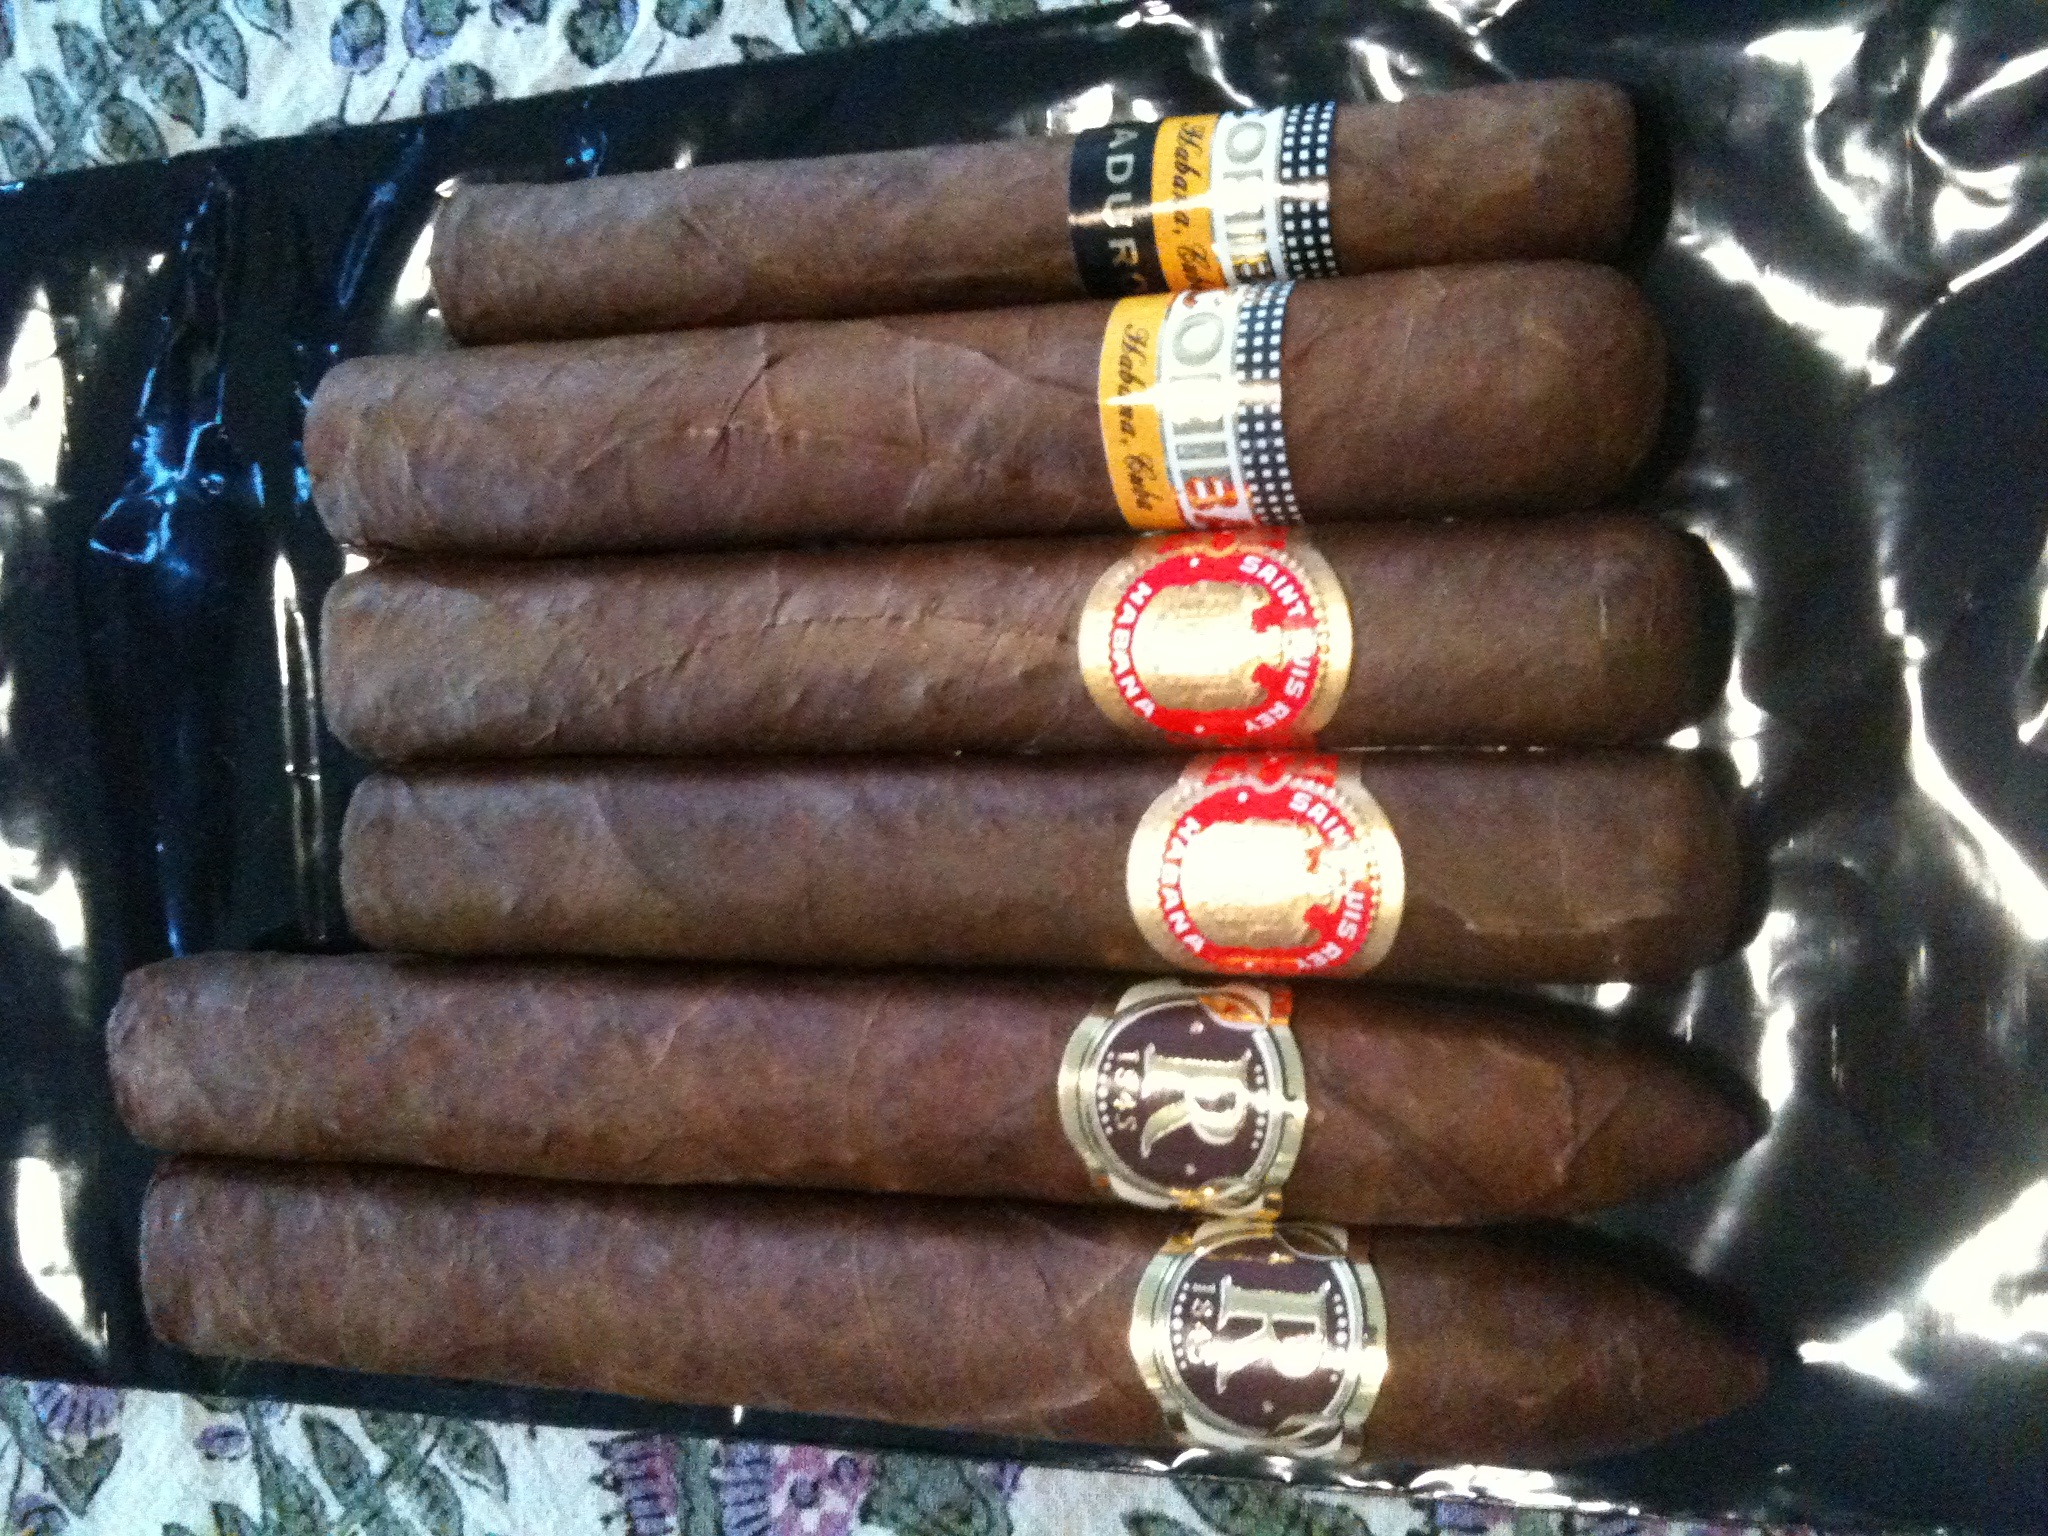 six cigars are shown in the case